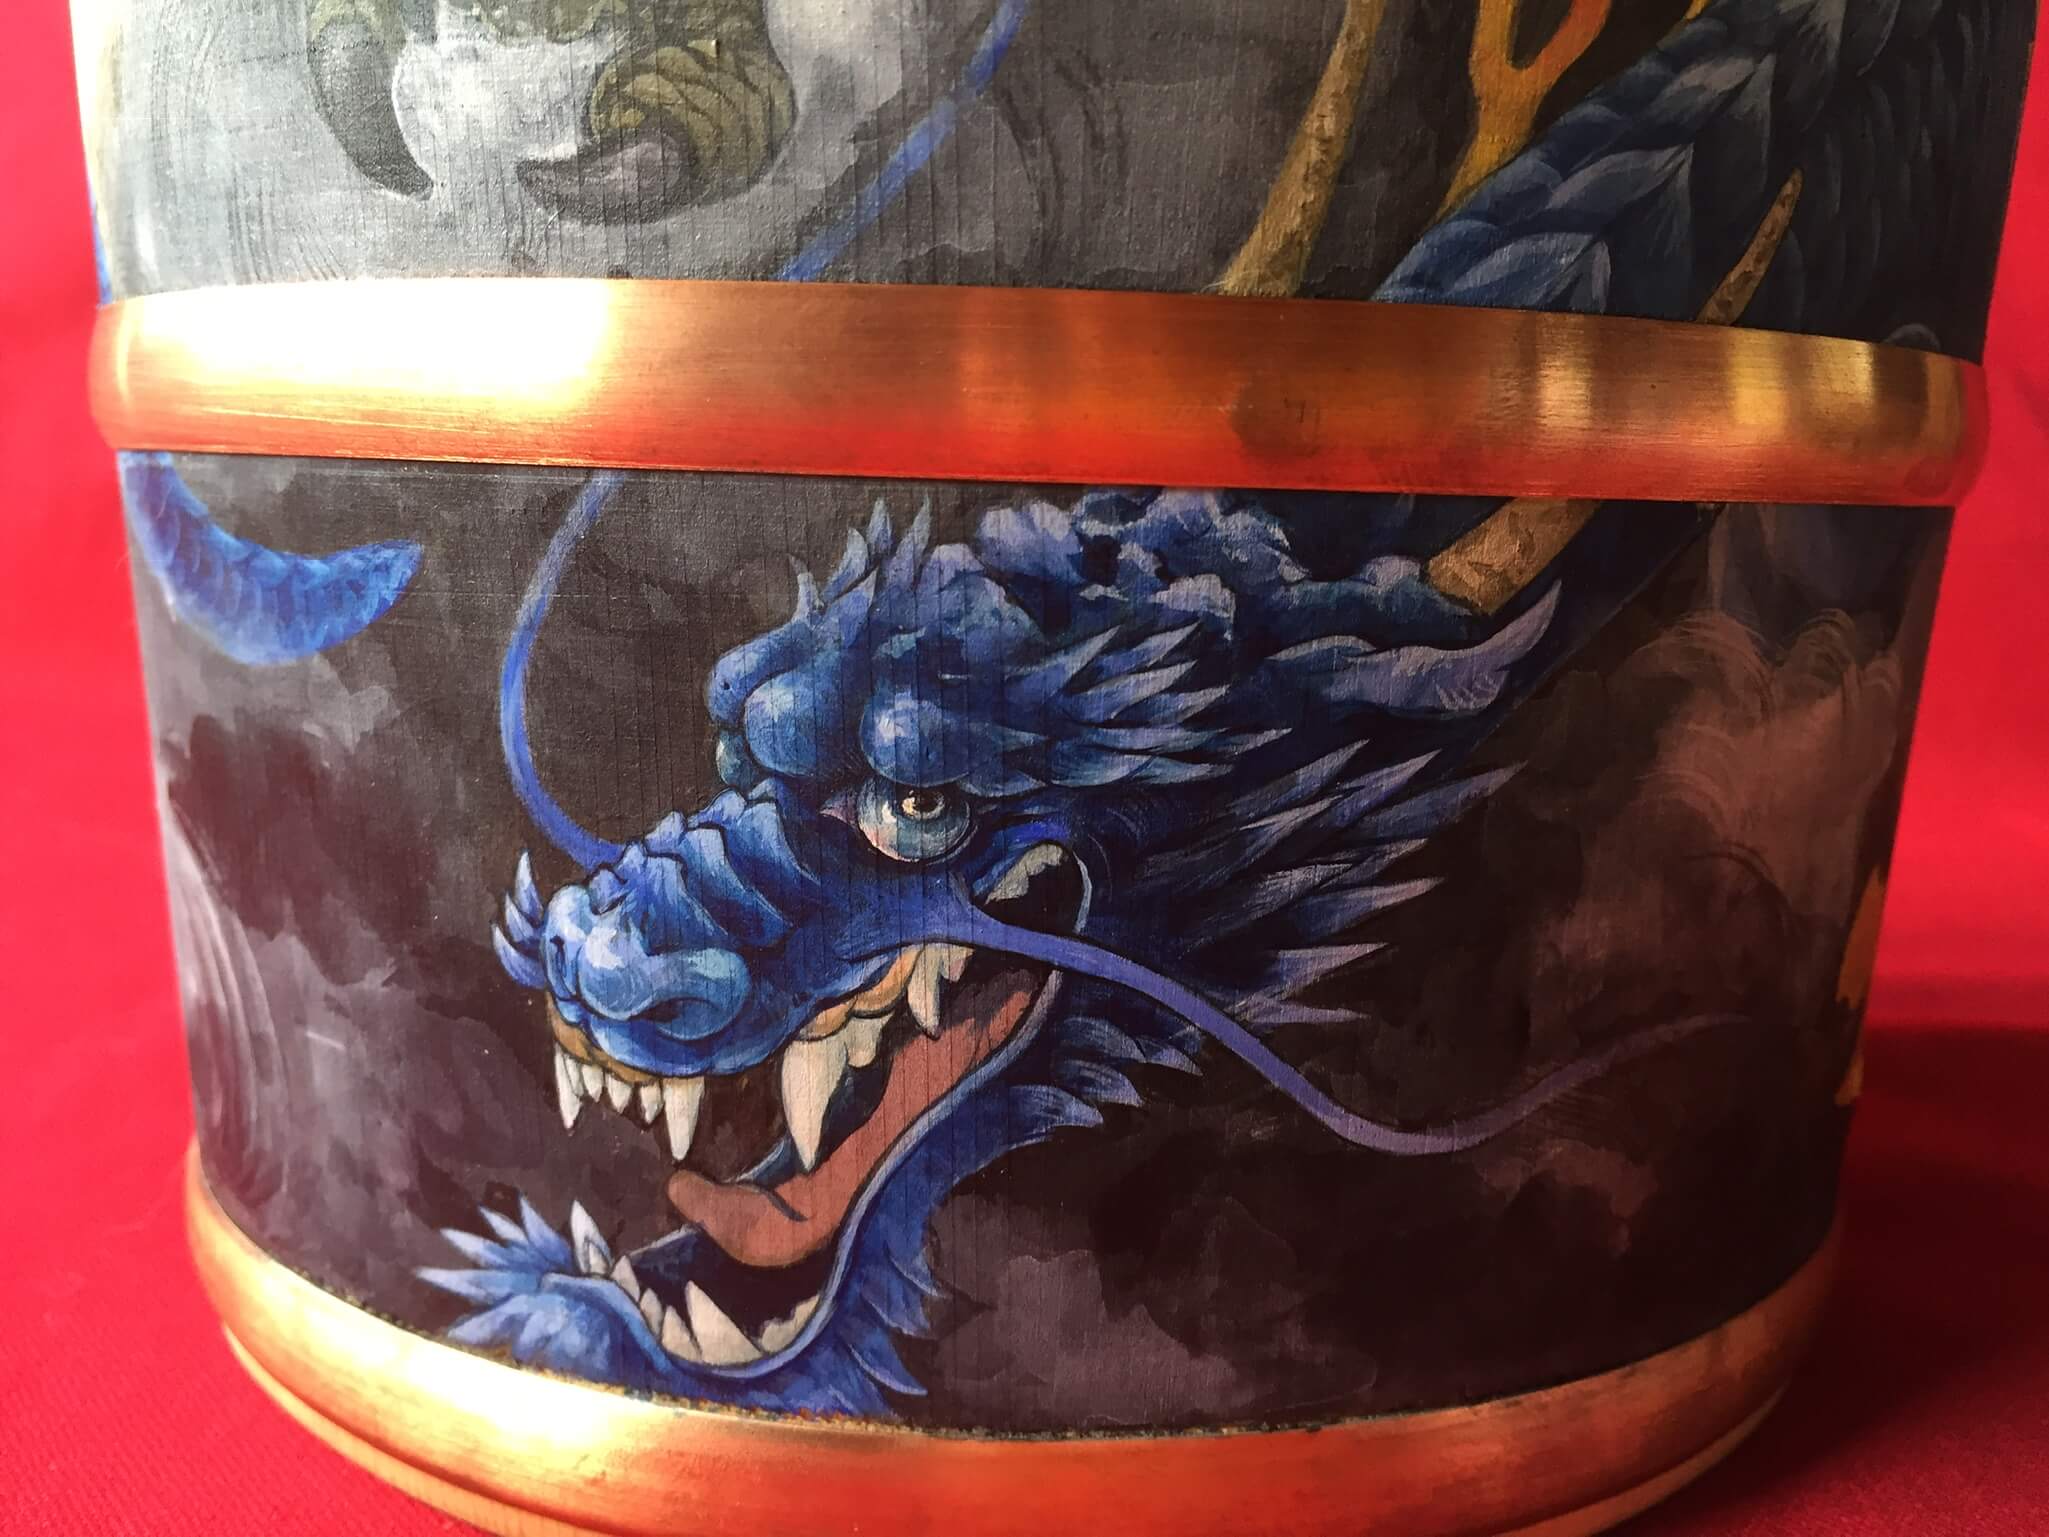 Painting on Suigyou-oke (Water line) “Blue Dragon with clouds”